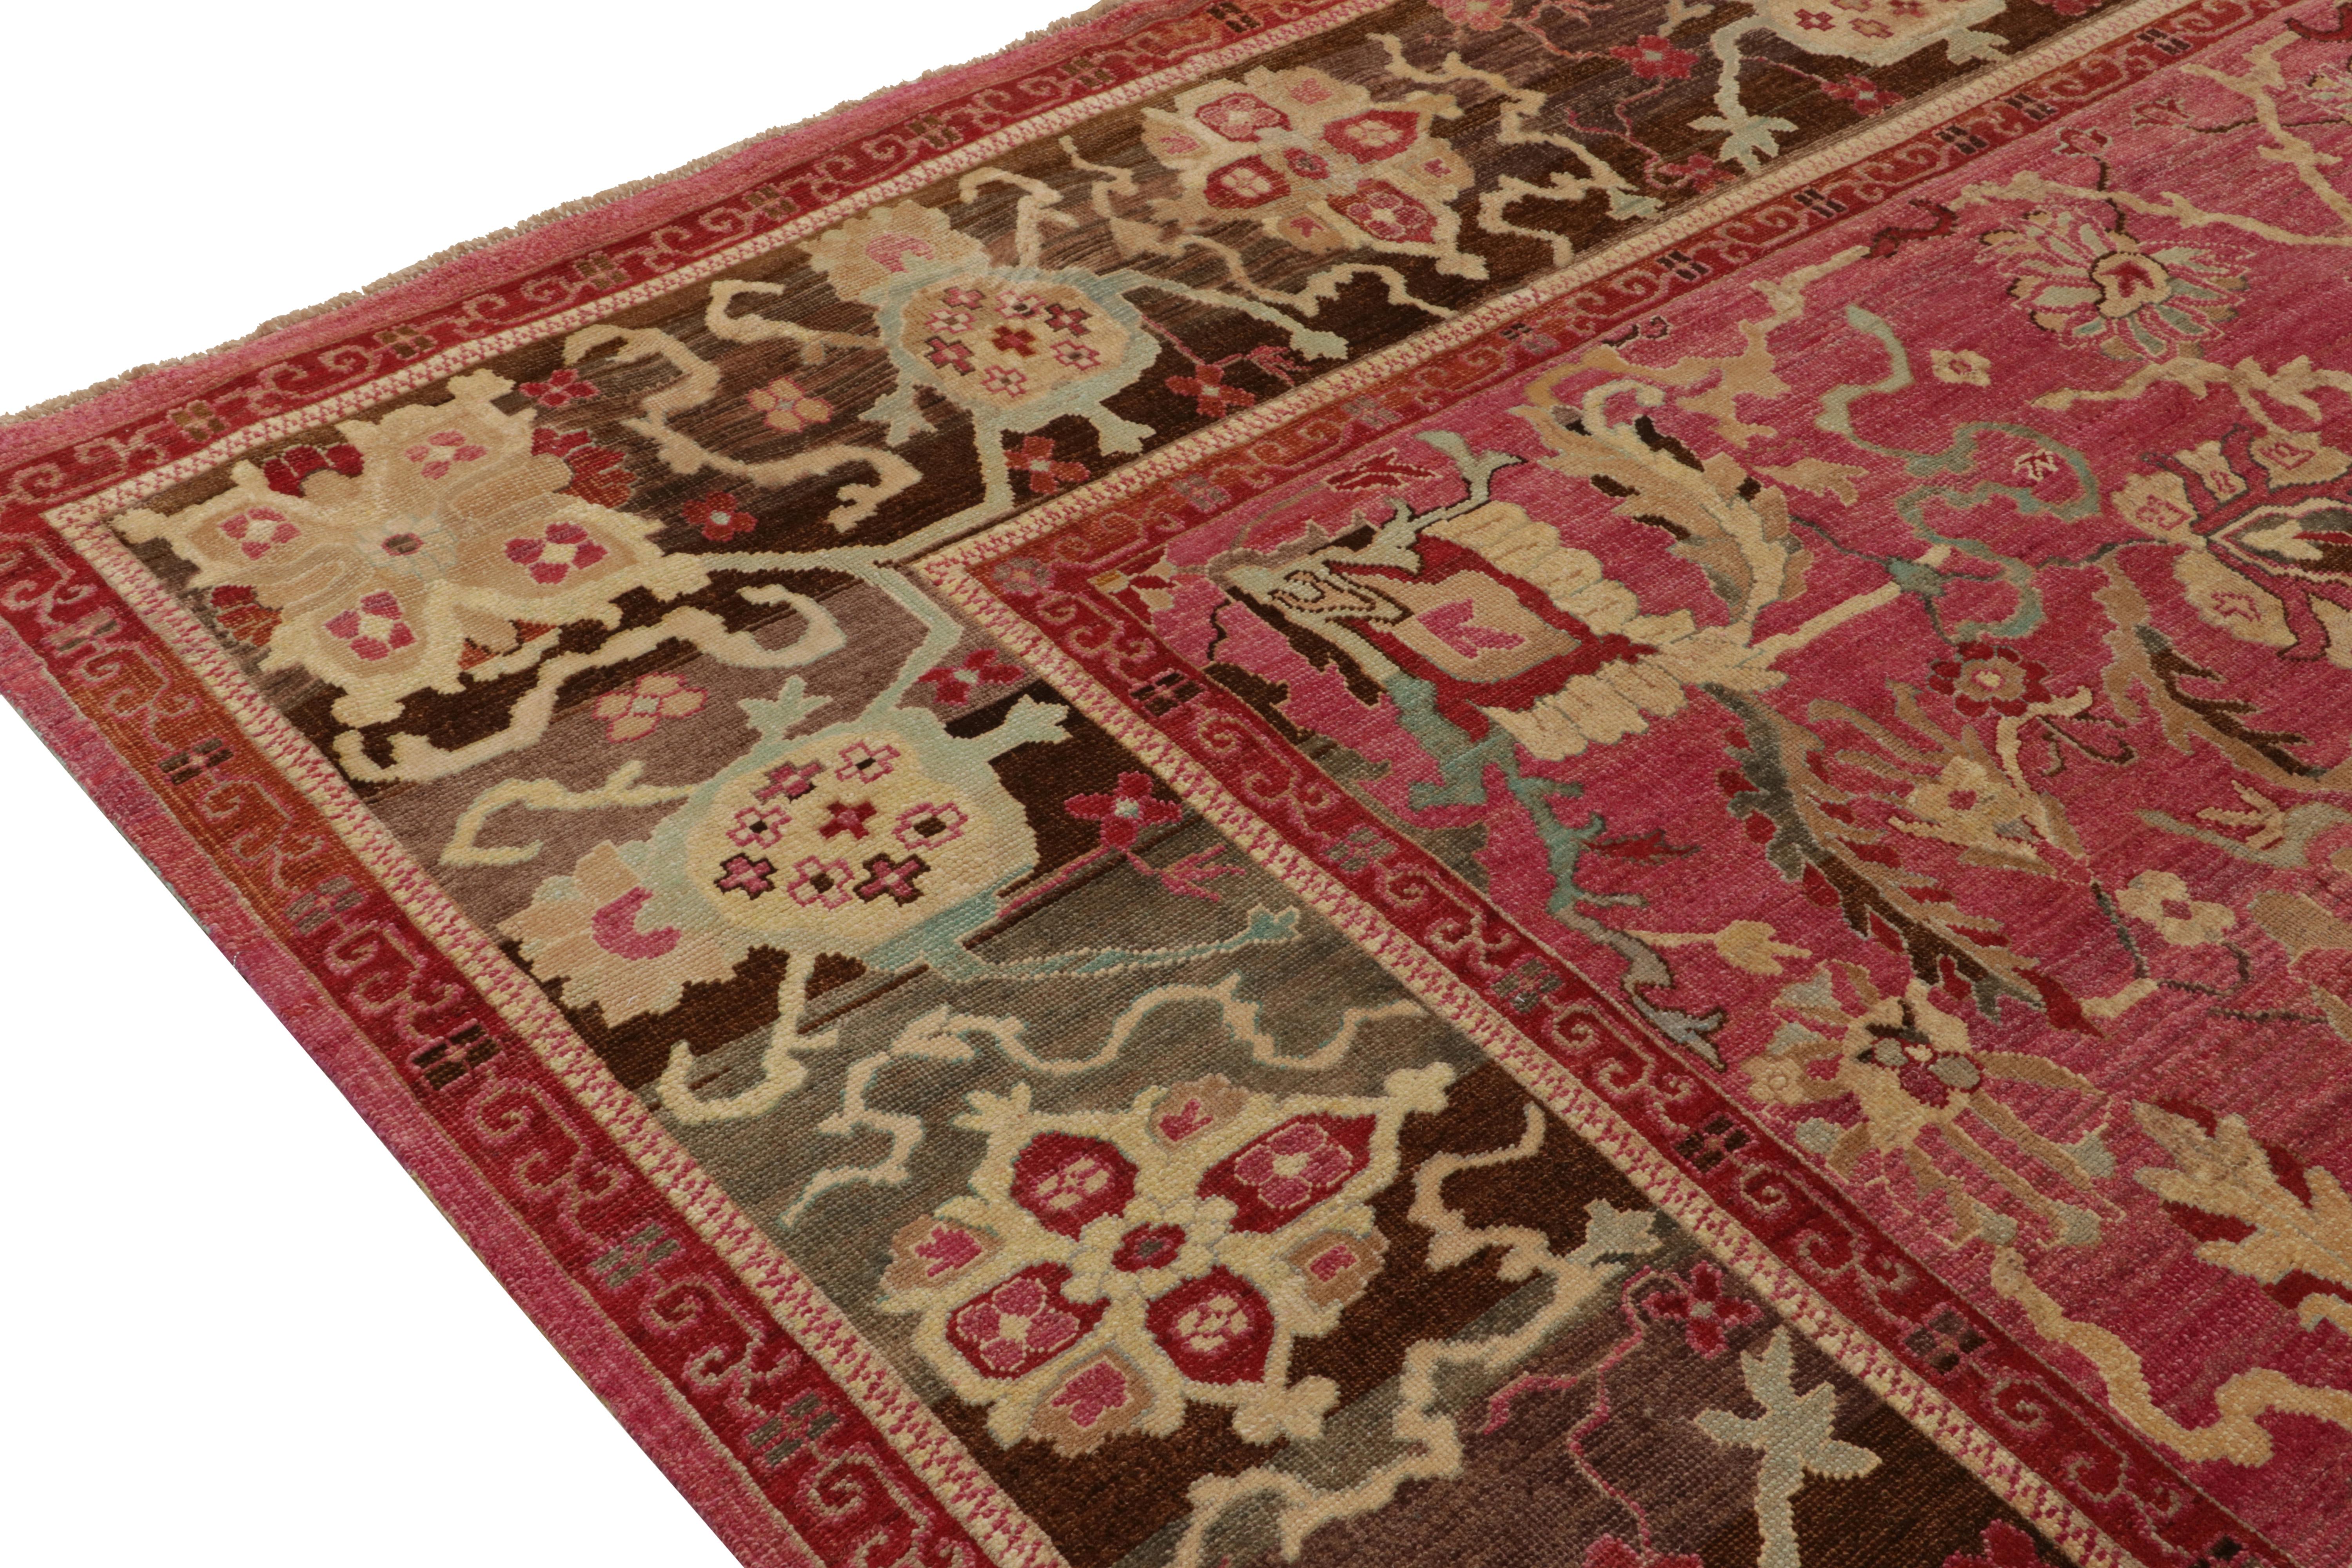 Hand-Knotted Rug & Kilim’s Classic Style Square Rug in Pink, Red and Beige-Brown Florals For Sale